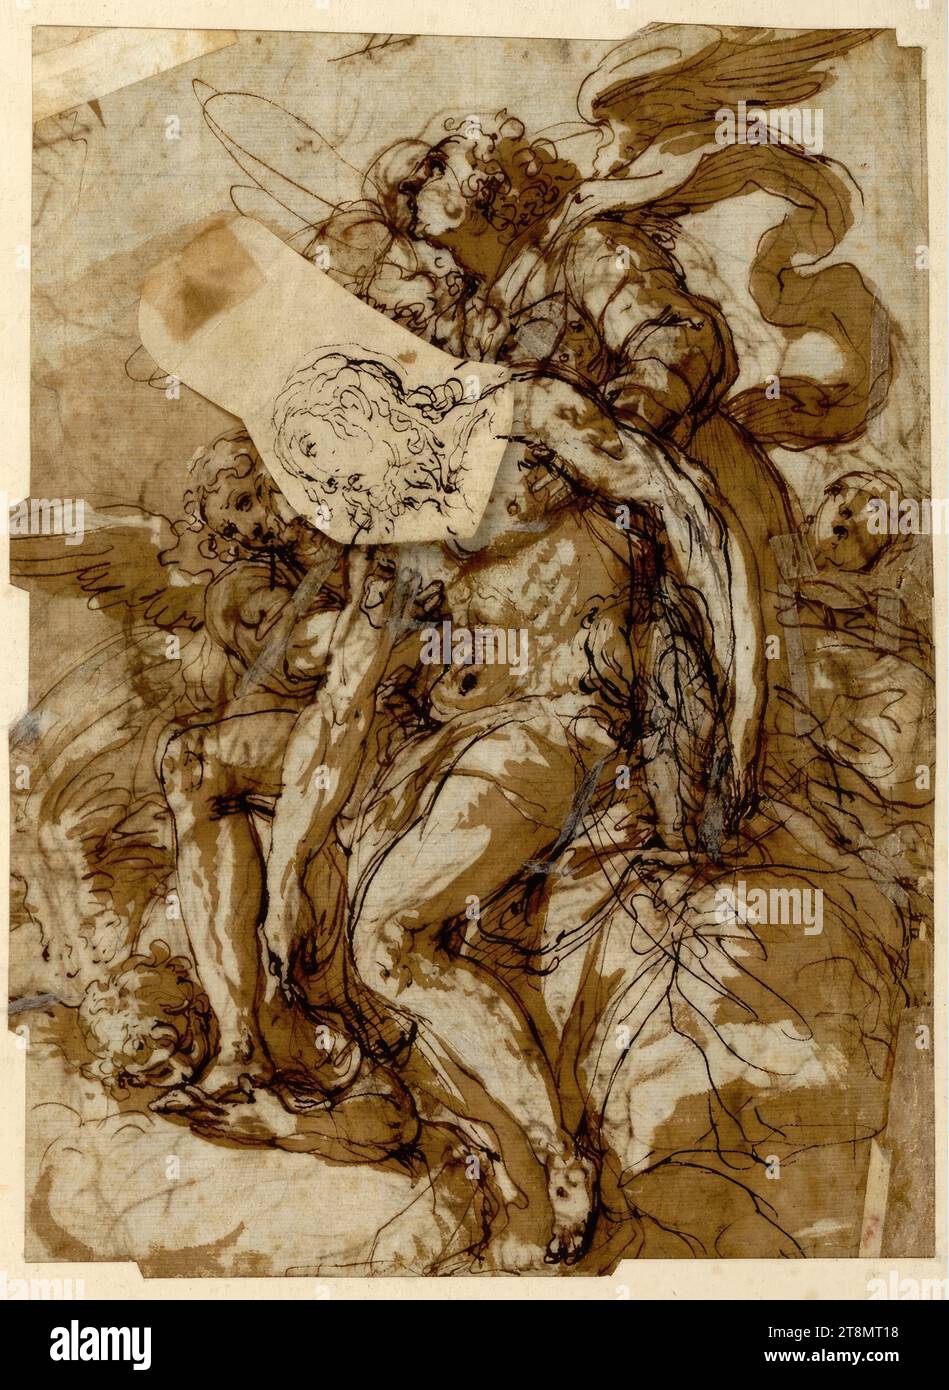 Christ's body supported by angels, Christ's head glued again as a pentimento on a movable piece of paper, Federico Zuccari (Sant' Angelo in Vado 1540/41 - 1609 Ancona), drawing, pen; Ink; washed, 25.8 x 19.8 cm Stock Photo